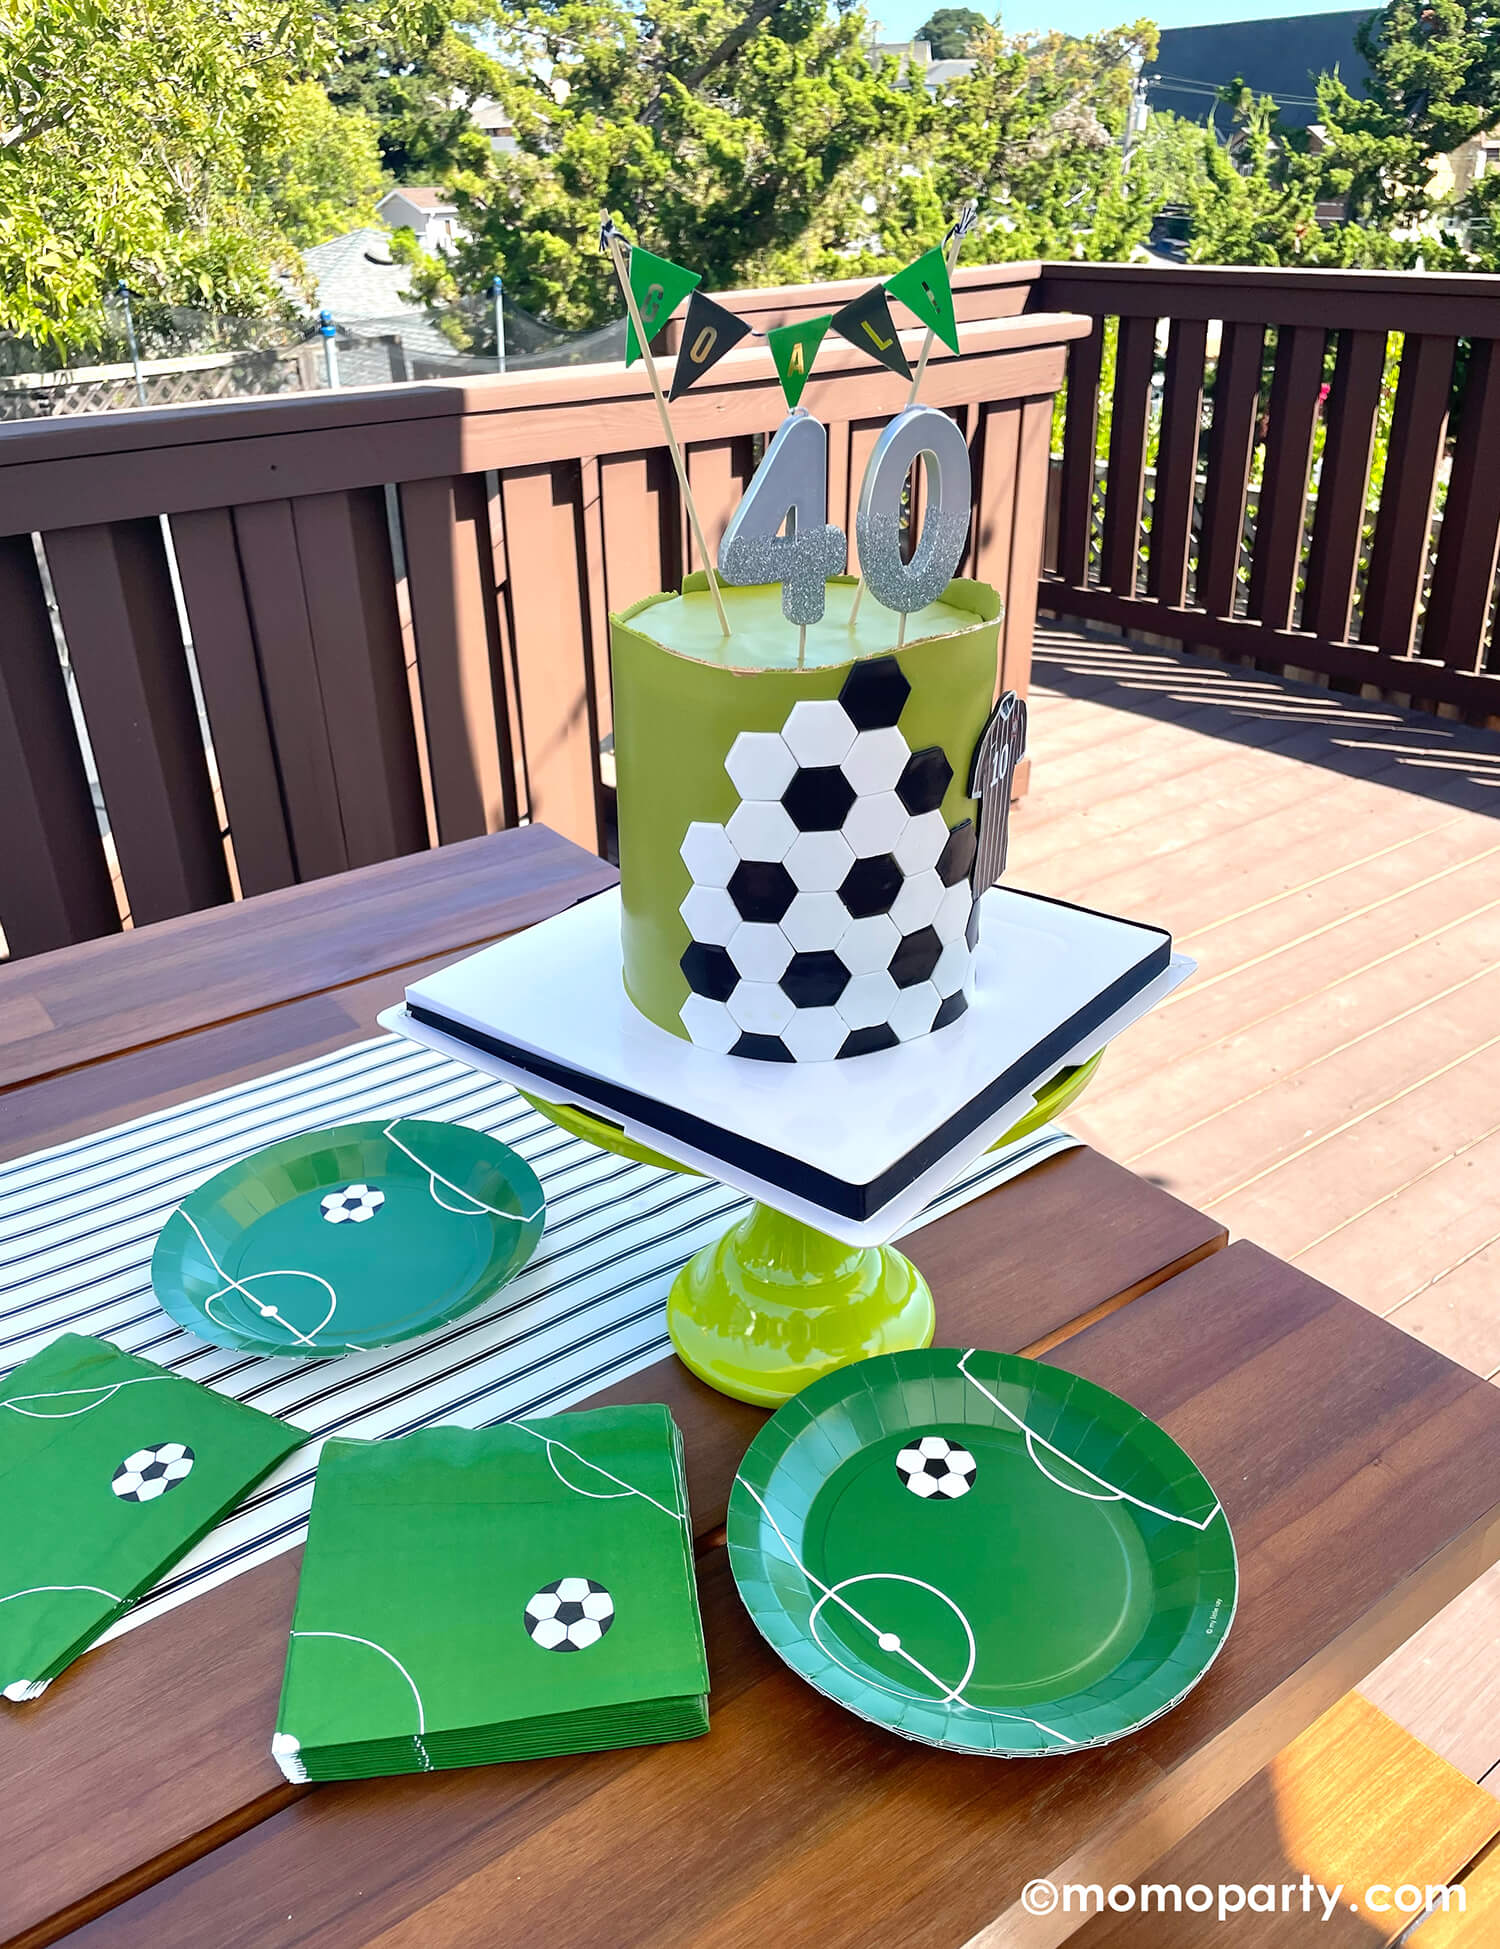 A backyard soccer themed birthday party with soccer themed plates and napkins in green with modern soccer design, next to them is a soccer themed birthday cake topper with silver number birthday candles and "goal" cake topper in black and green with gold detail.